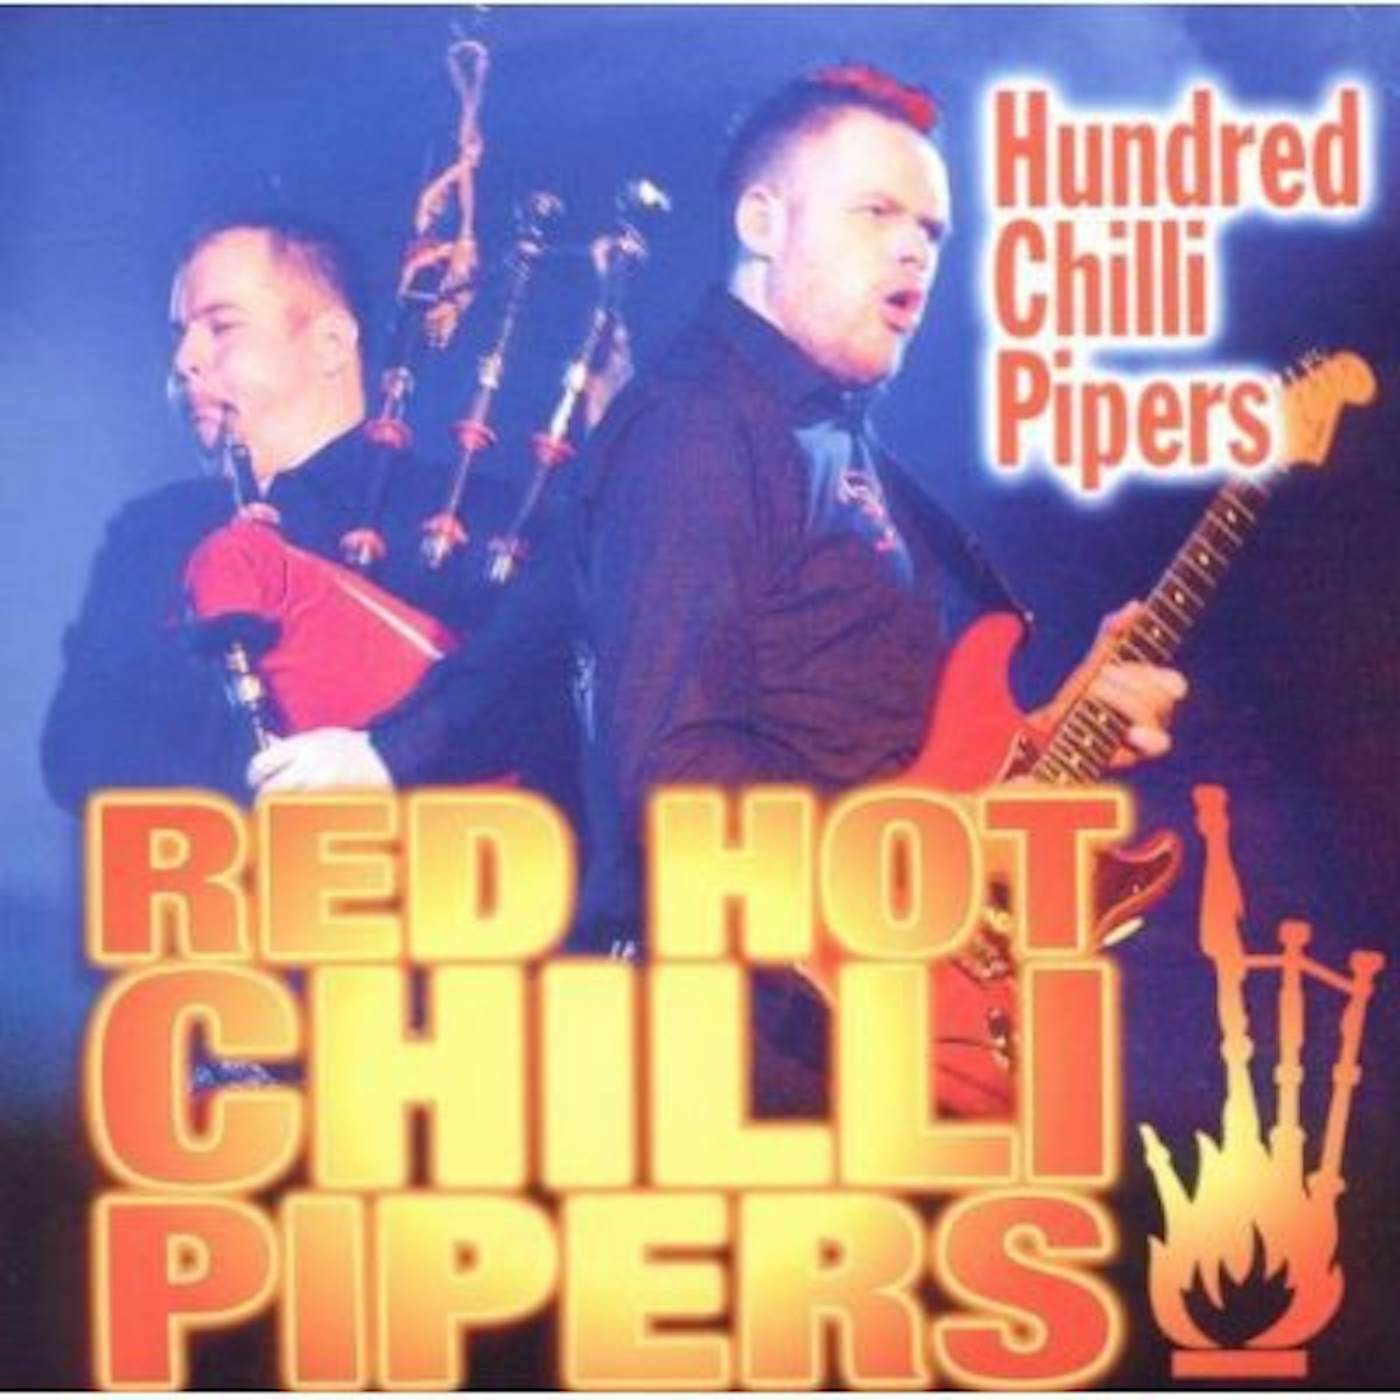 Red Hot Chilli Pipers HUNDRED CHILLI PIPERS CD